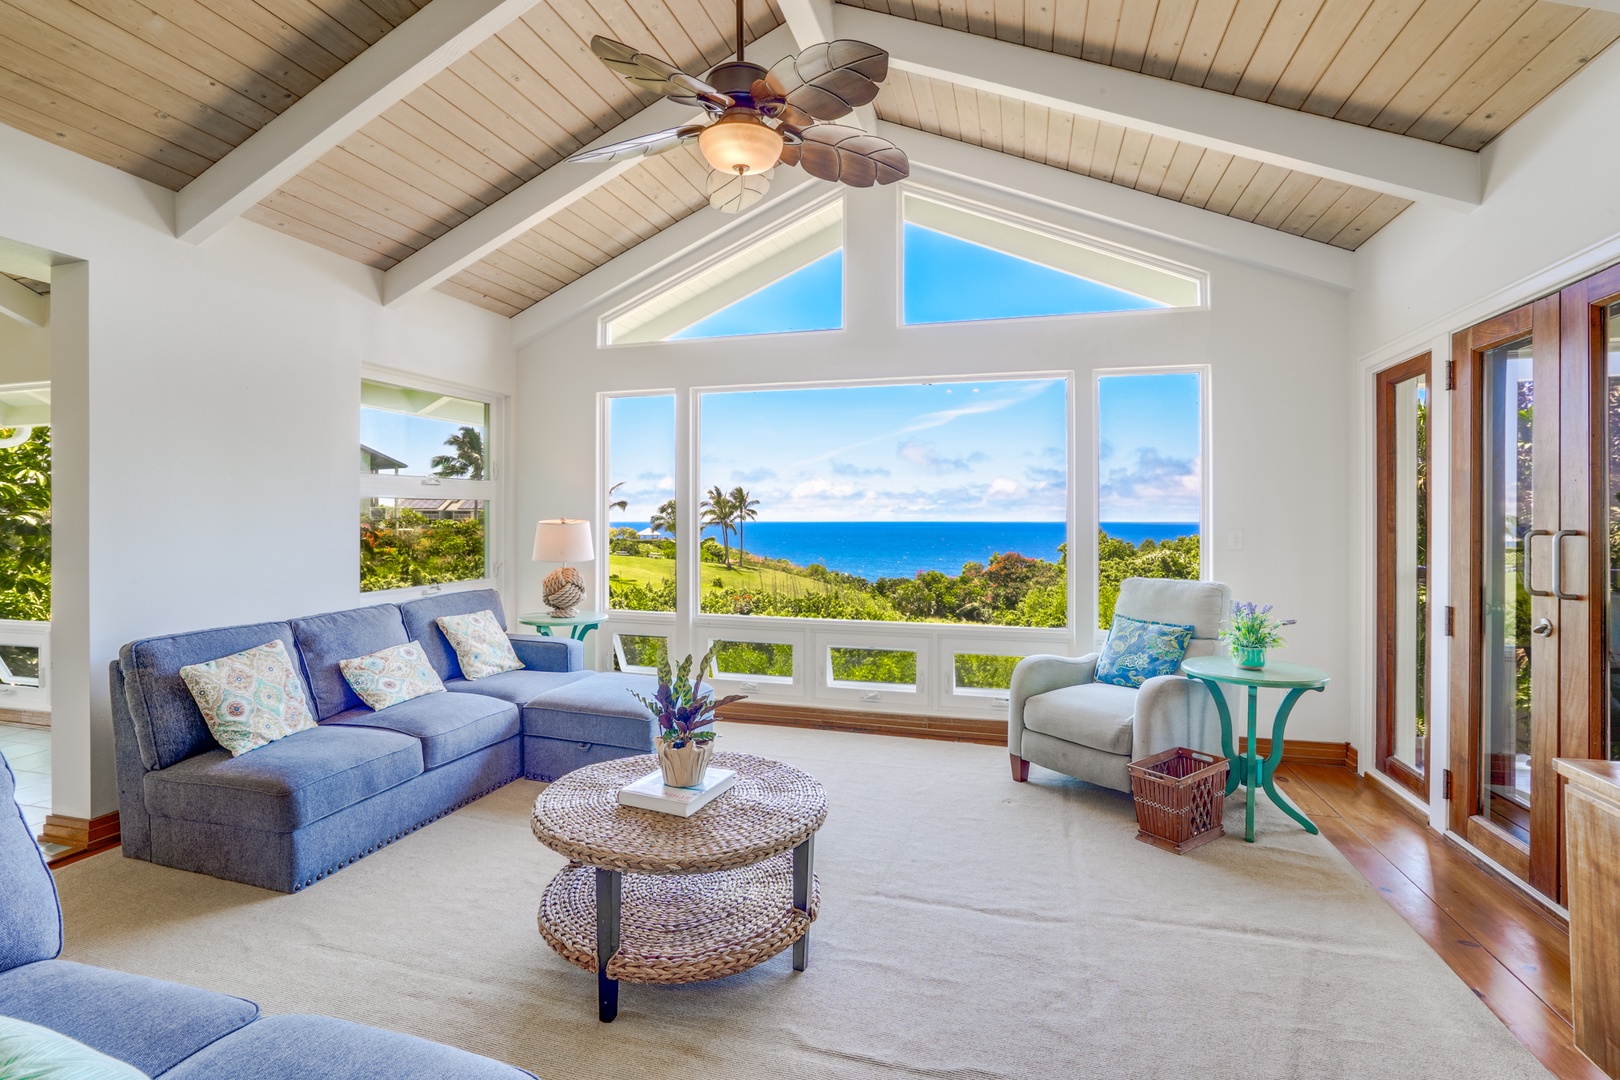 Princeville Vacation Rentals, Wai Lani - Enjoy the therapeutic calm of our spacious living area, where natural light adds a touch of serenity to every corner.